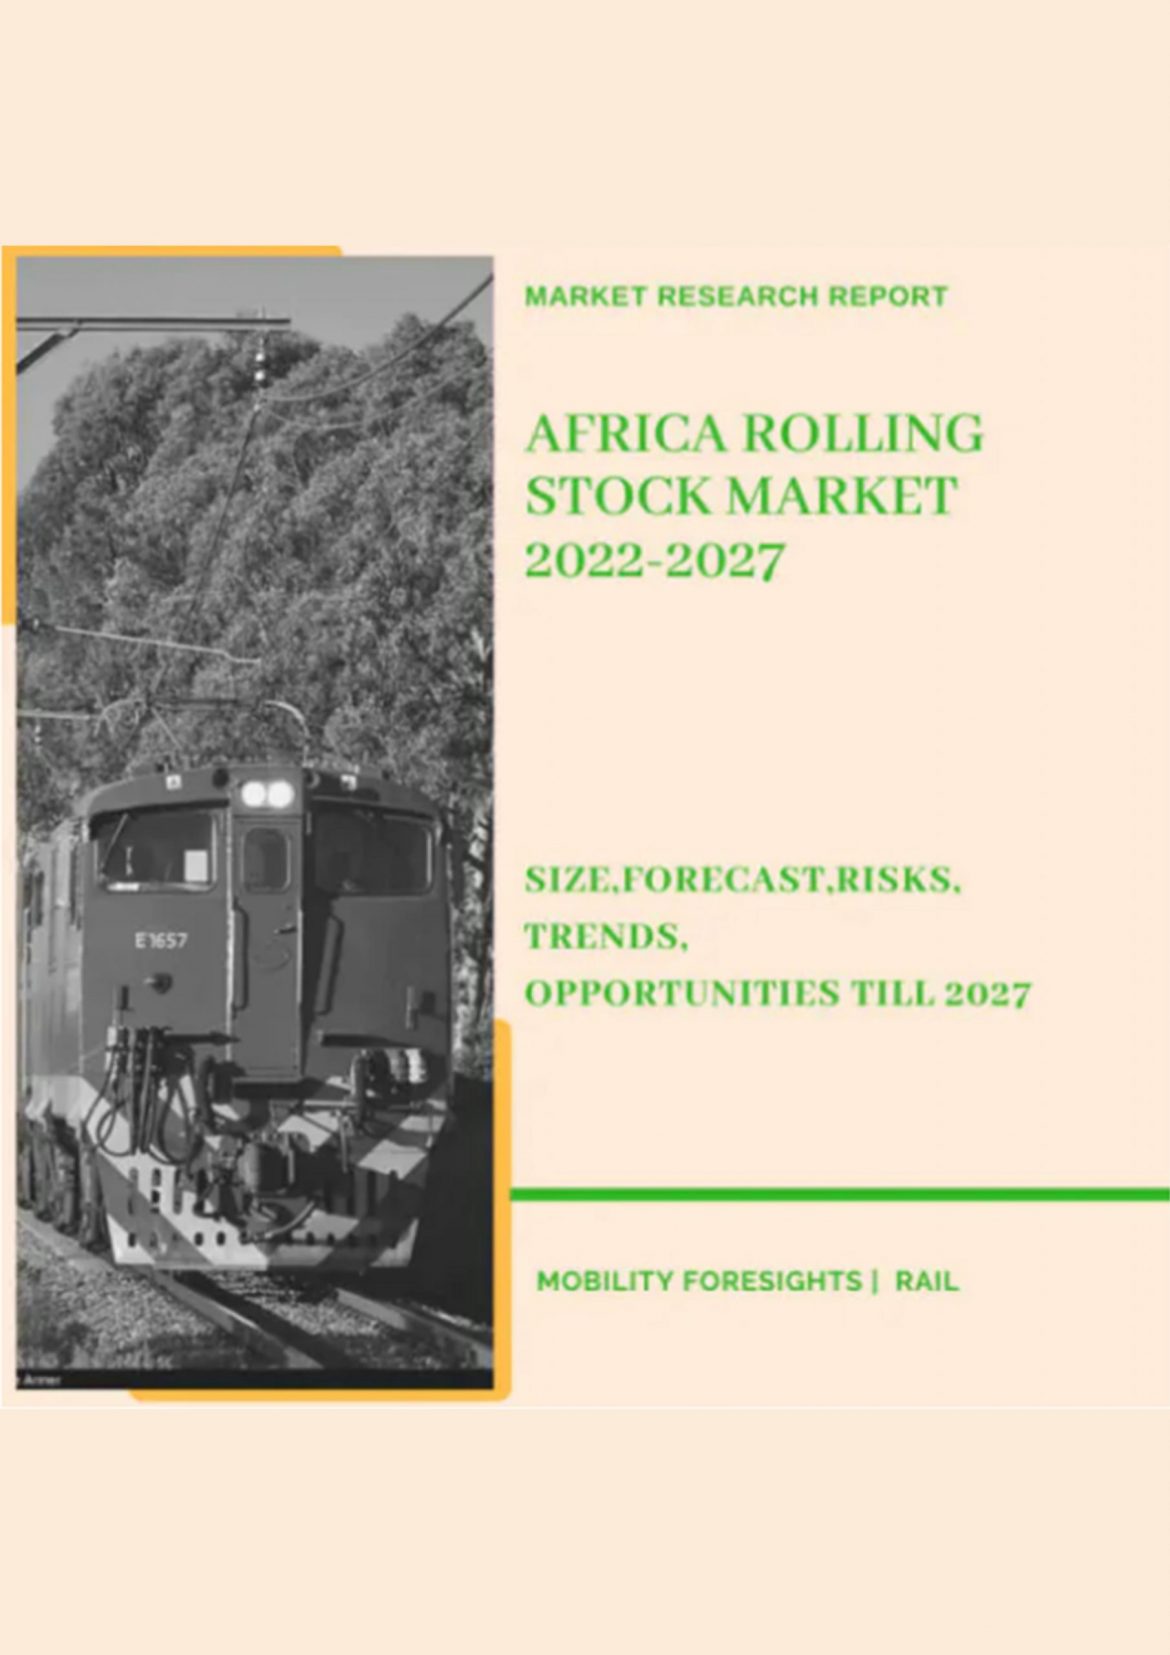 Africa Rolling Stock Market 2022-2027